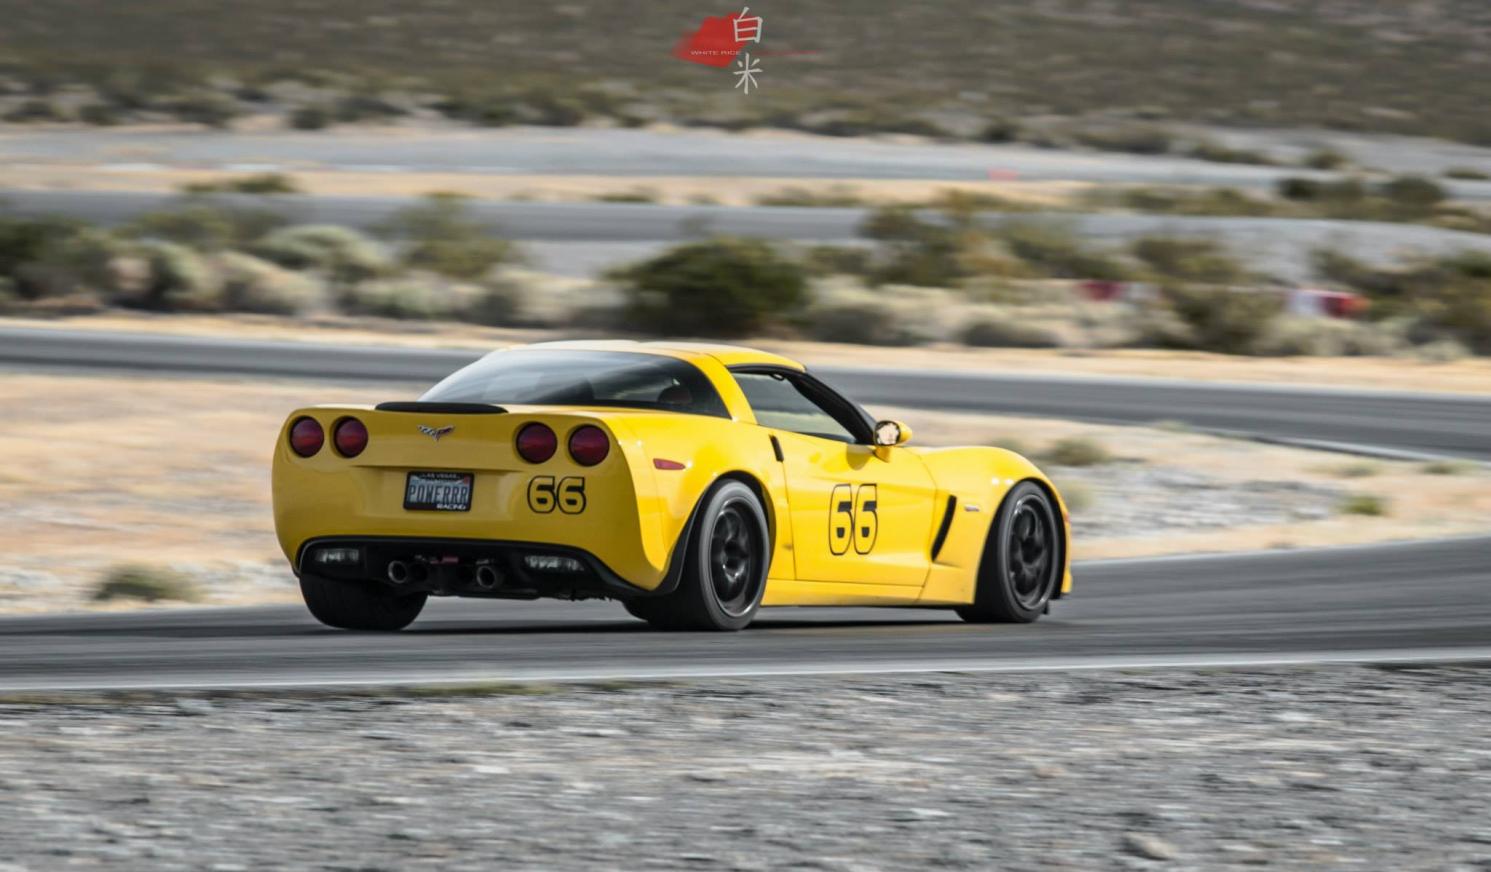 Taxi Yellow.  It looks like we might have our 2022 TRD Pro color-998a50c5-64d5-4628-a5e4-fabc47e9bef0-jpg